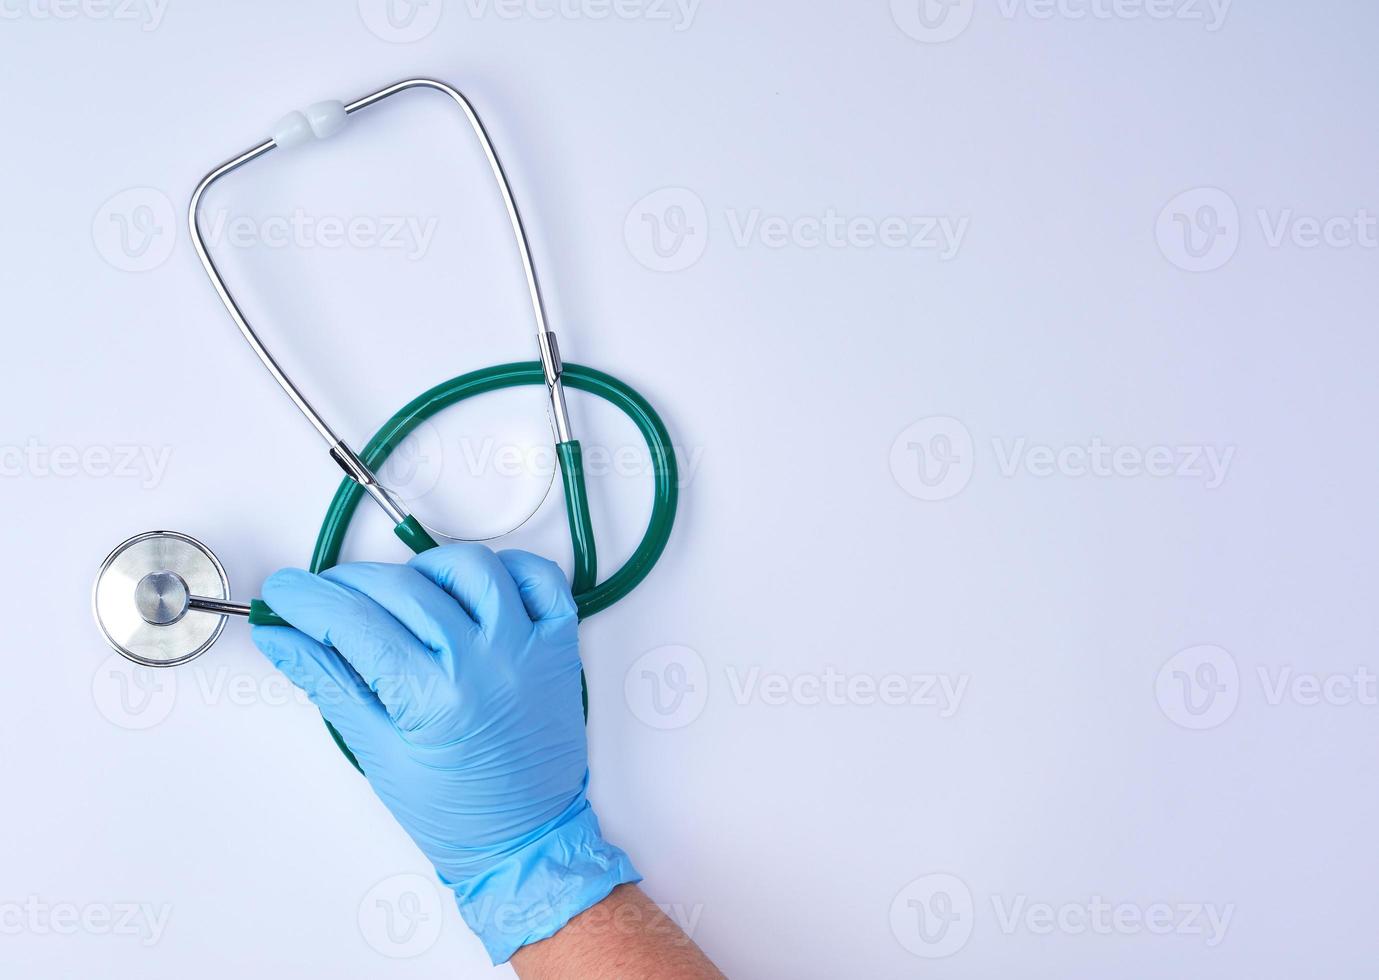 human hand in blue latex sterile gloves holding a medical stethoscope photo